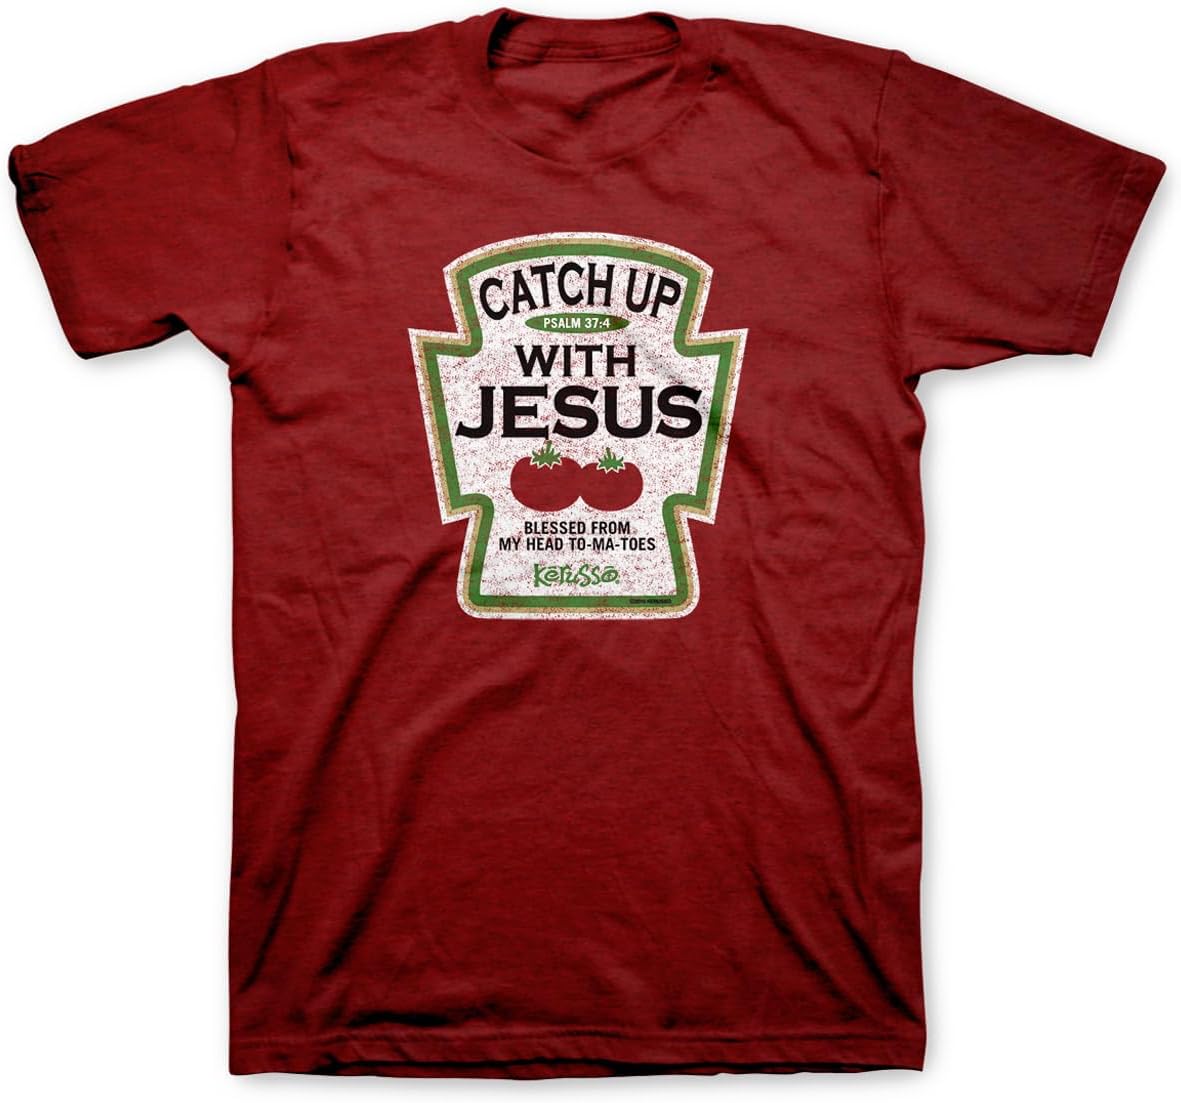 Catch Up with Jesus Funny Unisex Christian T-shirt claimedbygoddesigns